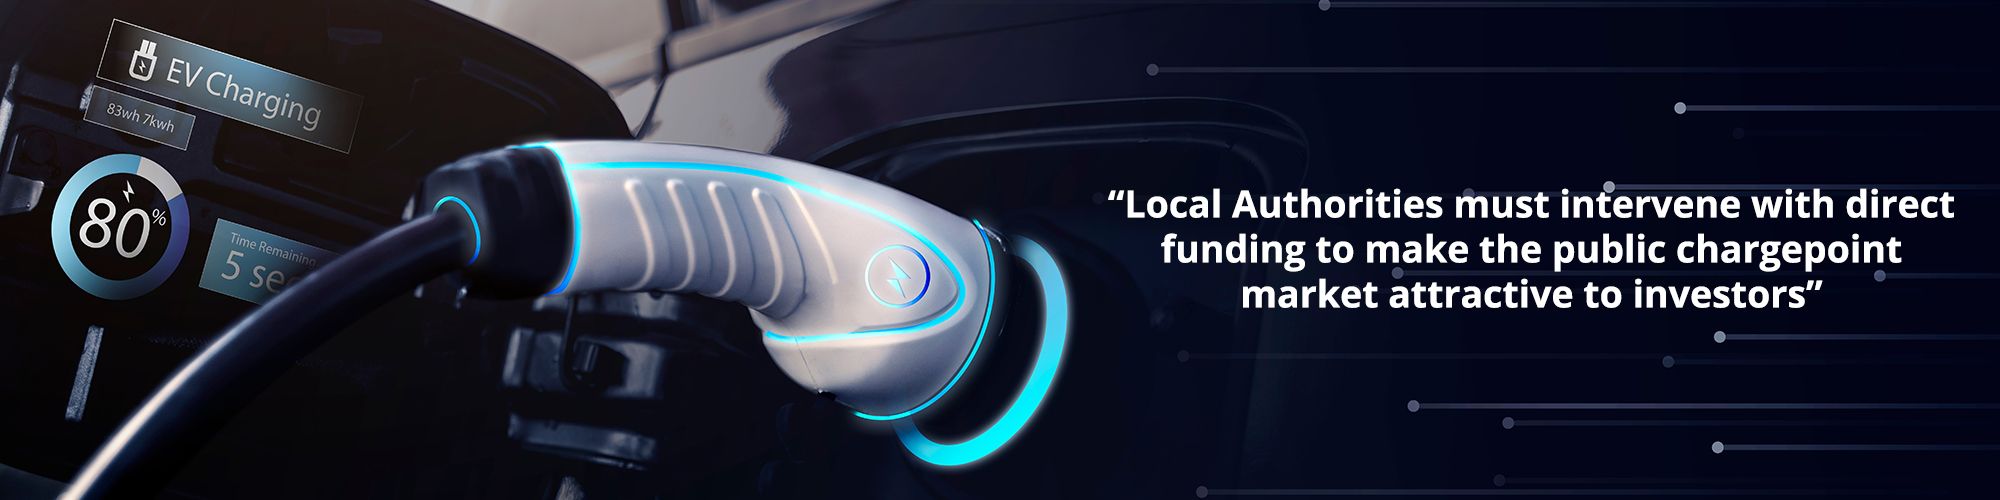 Charger plugged into electric car with text overlaid “Local Authorities must intervene with direct funding to make the public chargepoint market attractive to investors”